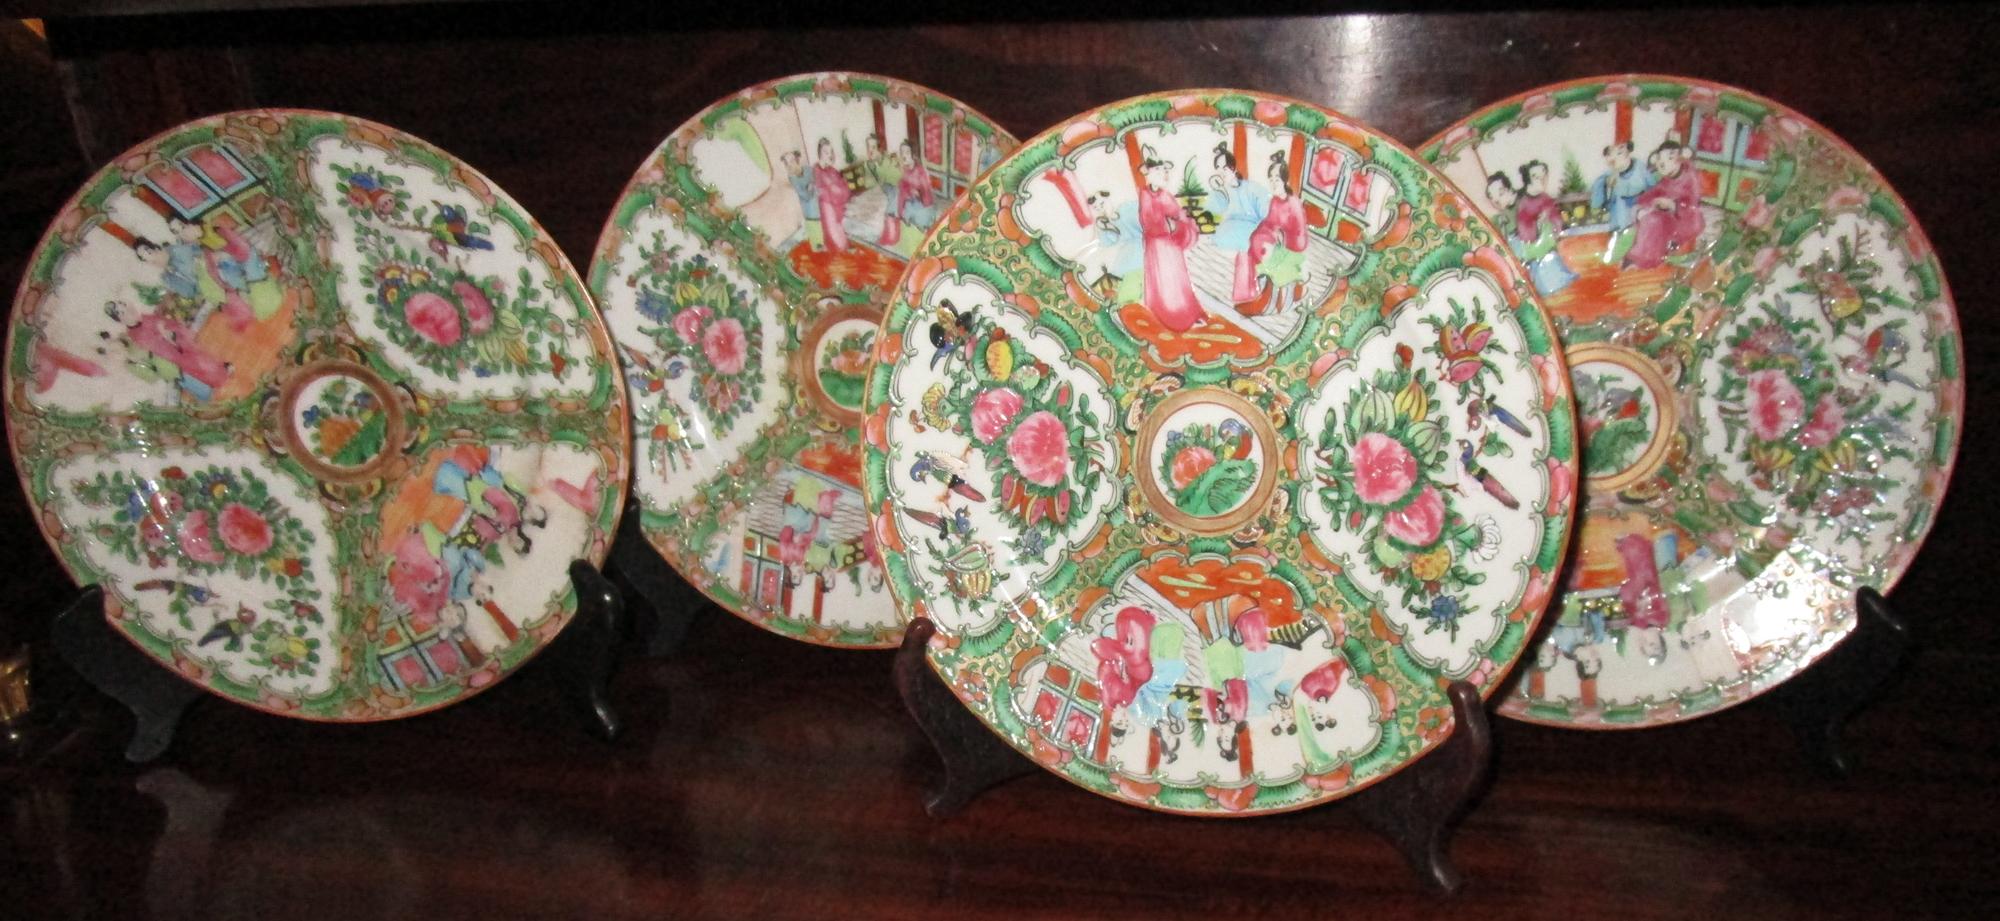 Set of four Chinese export Qing rose medallion plates featuring traditional medallion design with figures in scenes, floral and bird panels. Pink rose central medallion. Floral border.